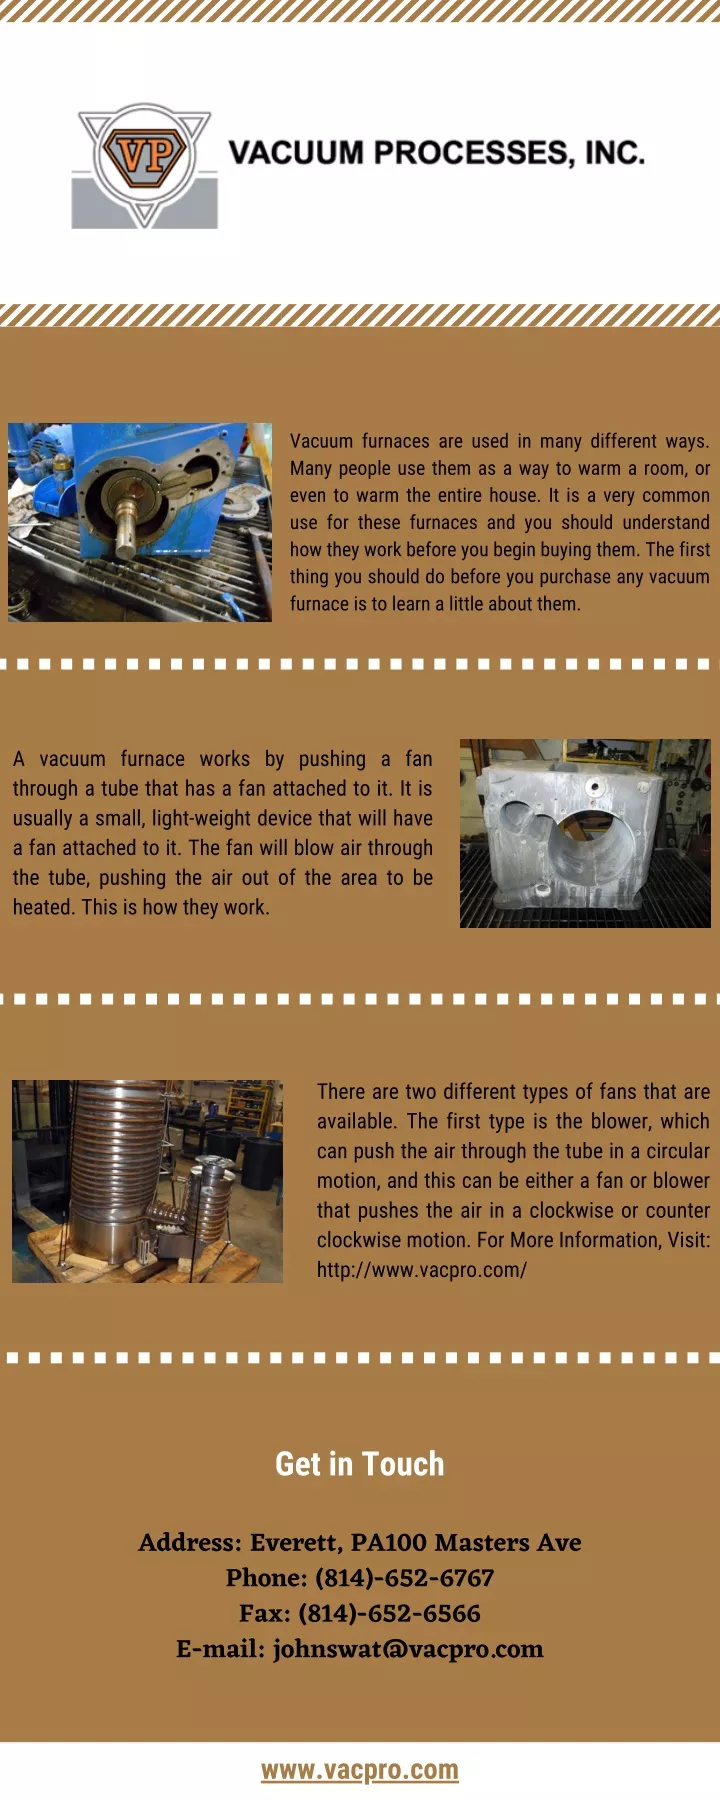 vacuum furnaces are used in many different ways